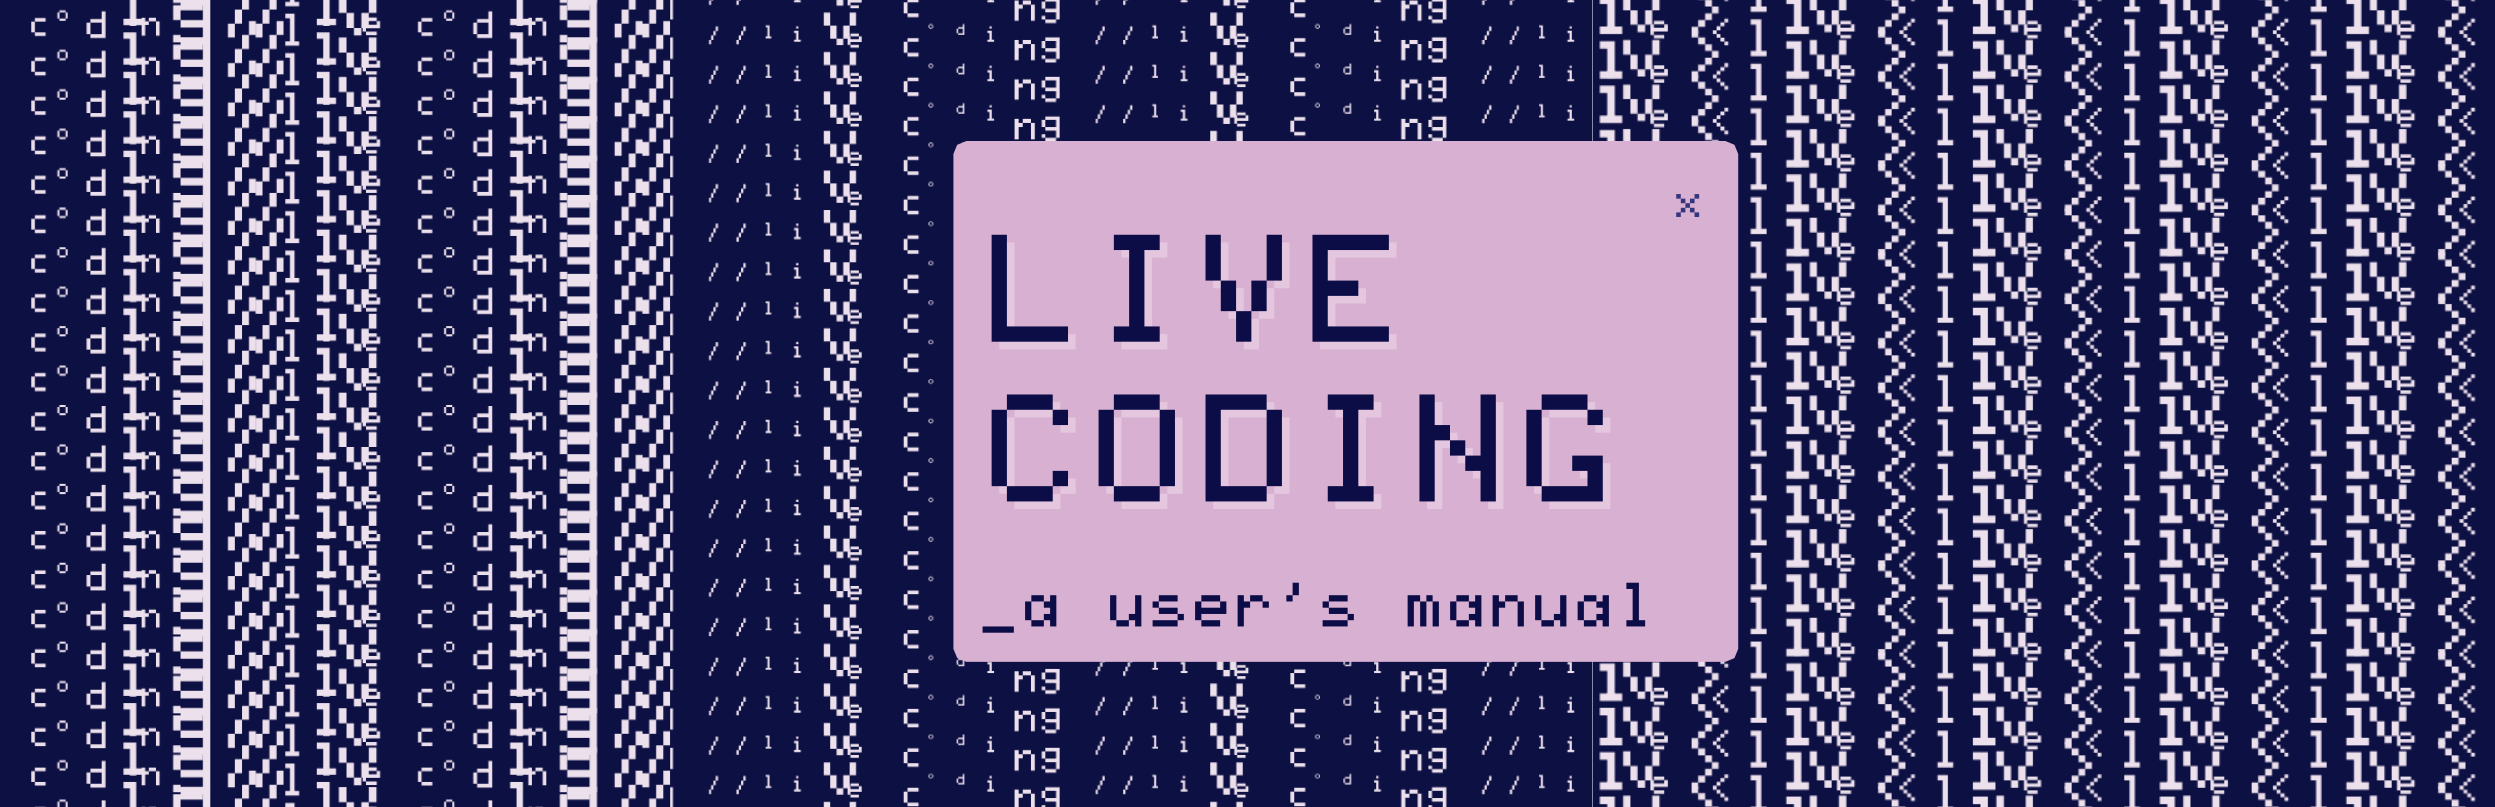 Performative, improvised, on the fly: live coding is about how people interact with the world and each other via code. In the last few decades, live c